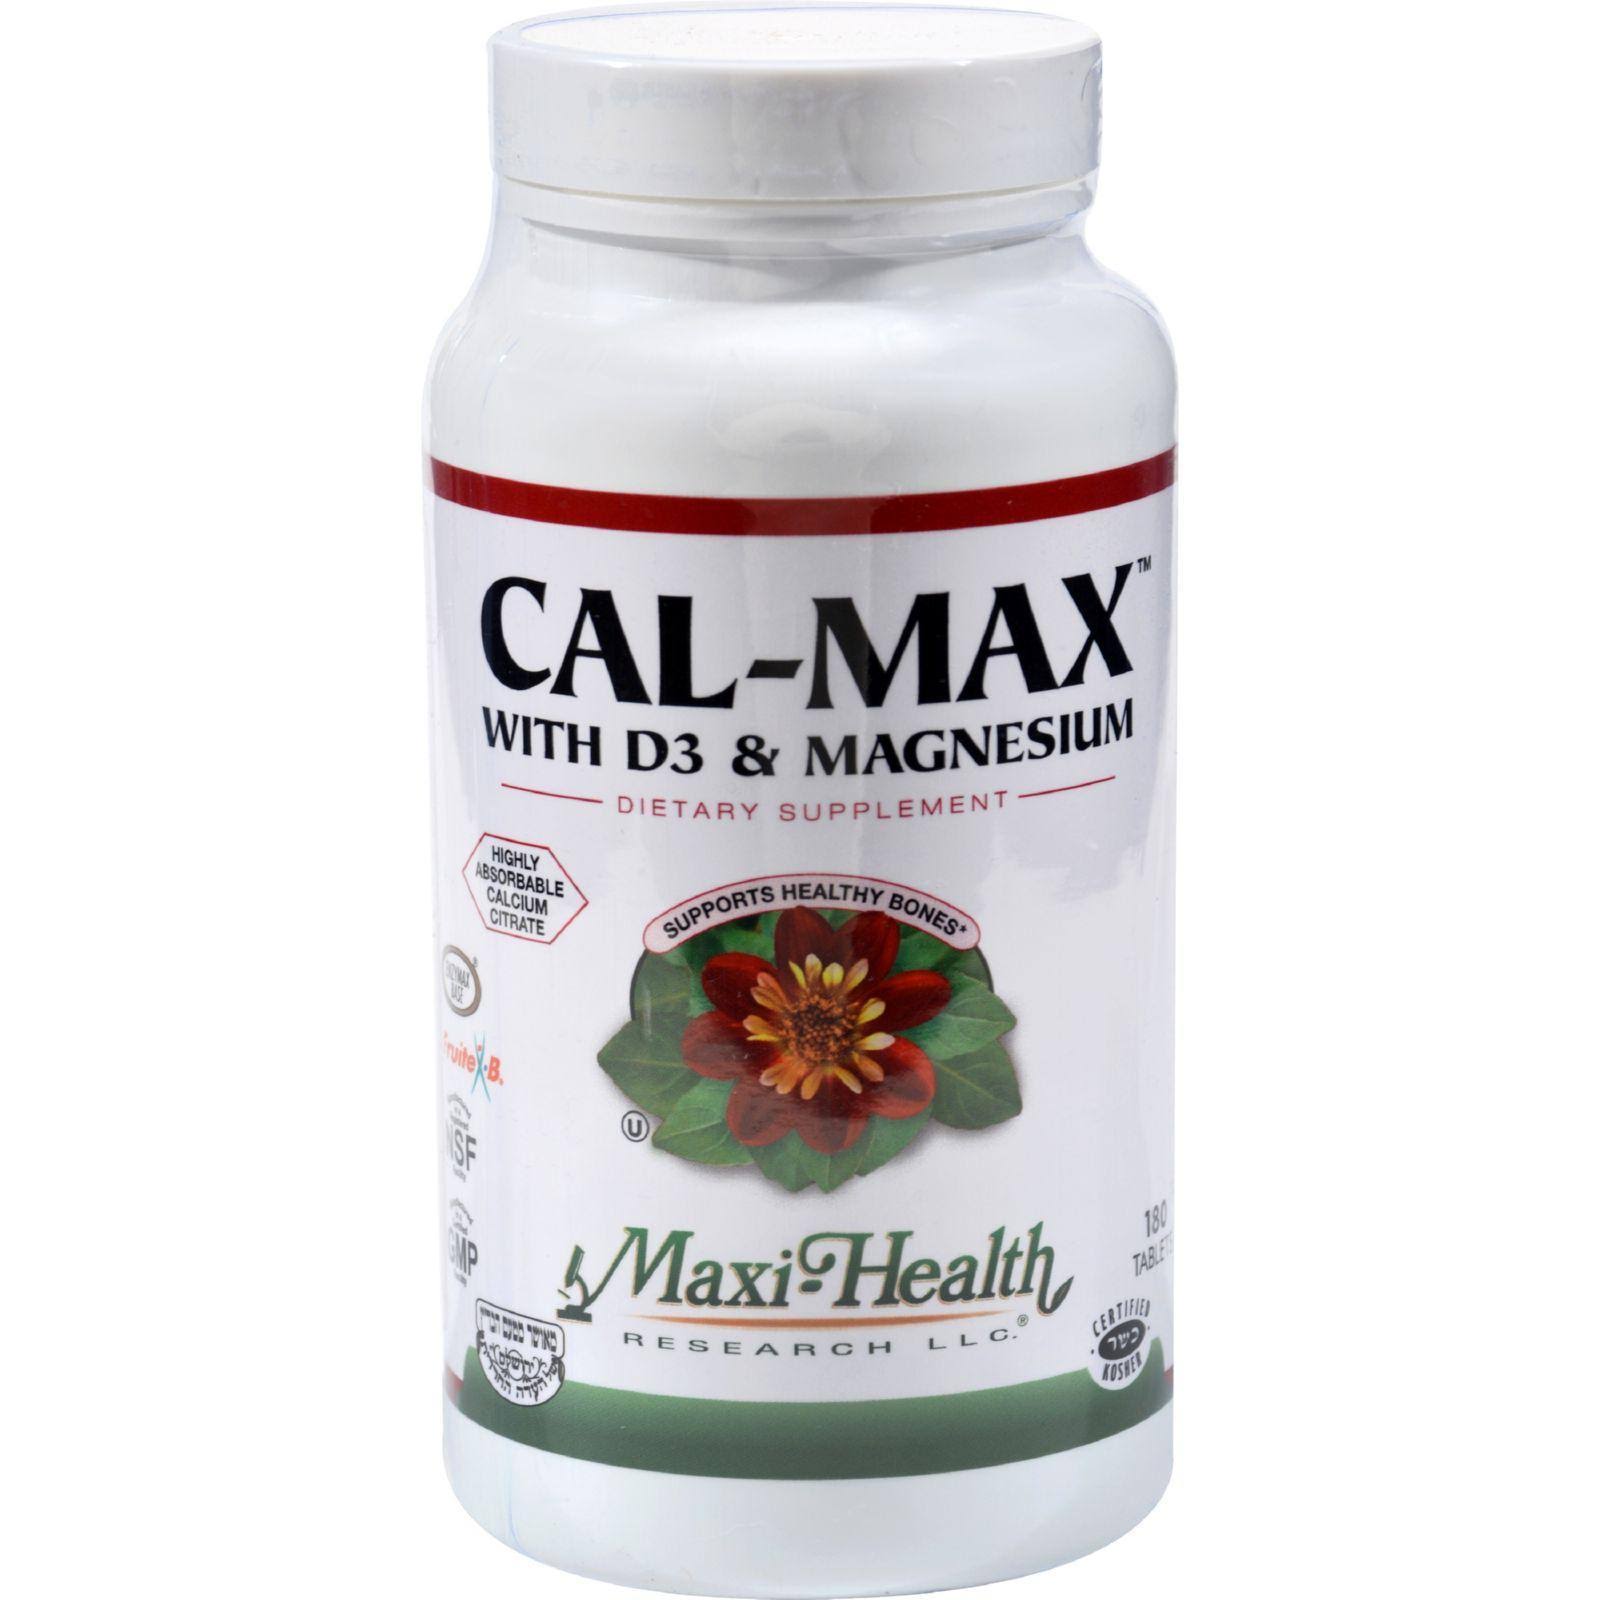 Maxi Health Calmax with D3 and Magnesium Dietary Supplement - 180 Tablets